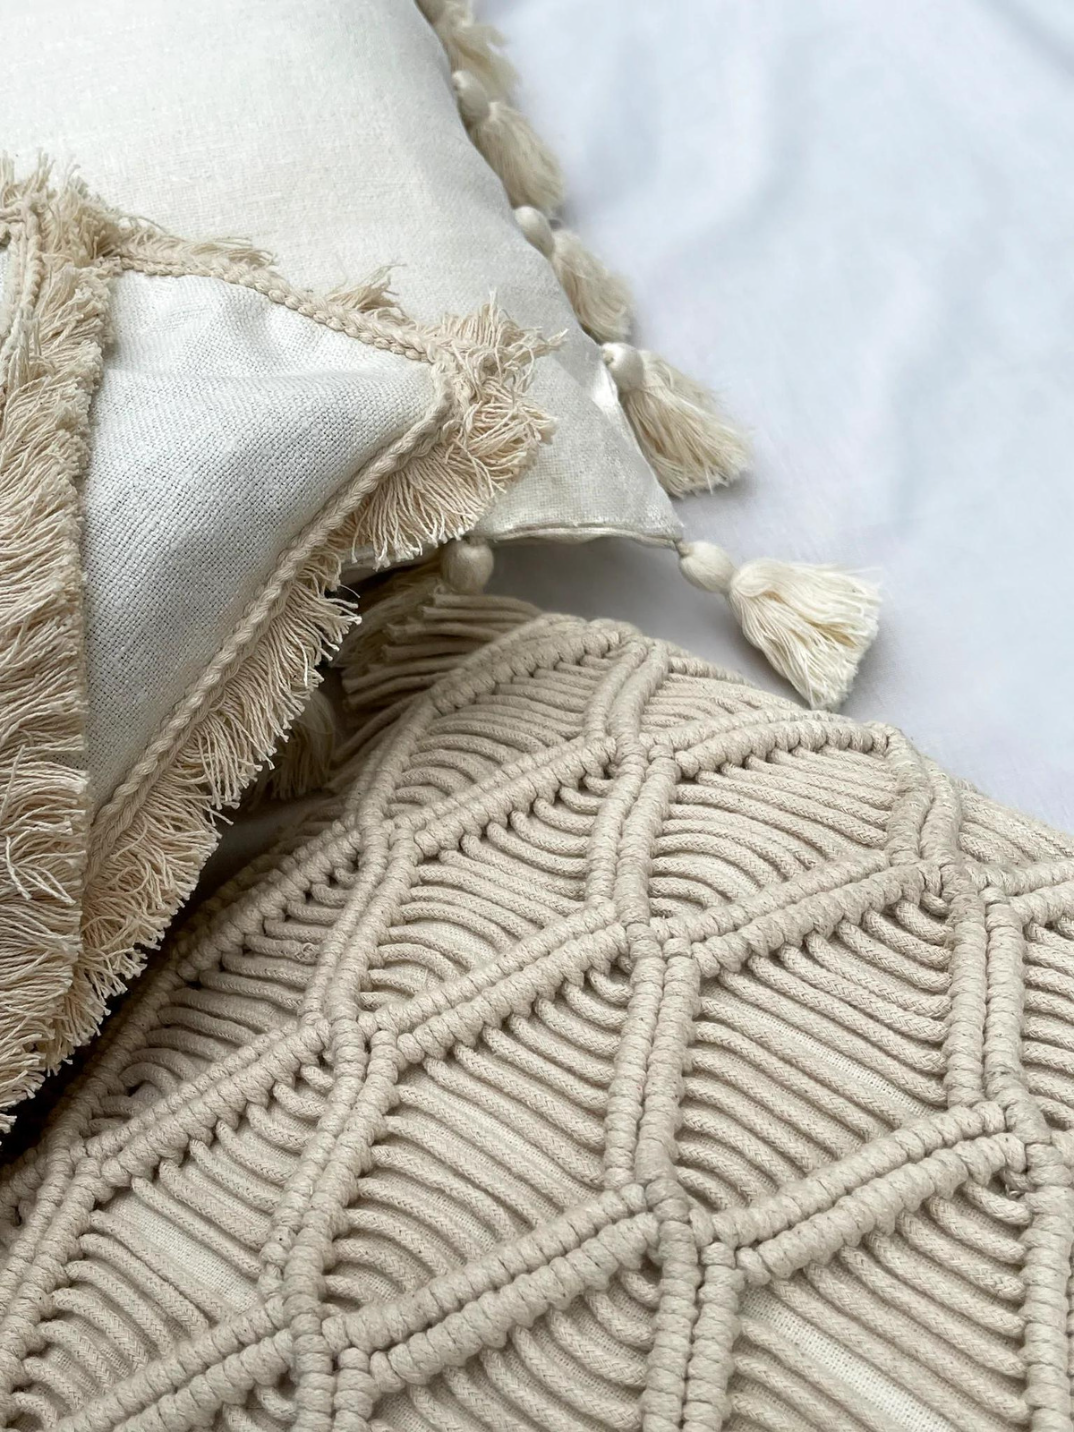 diamond macrame cushion 100% cotton made in India shop women-owned sustainable brands ethical home goods bohemian style